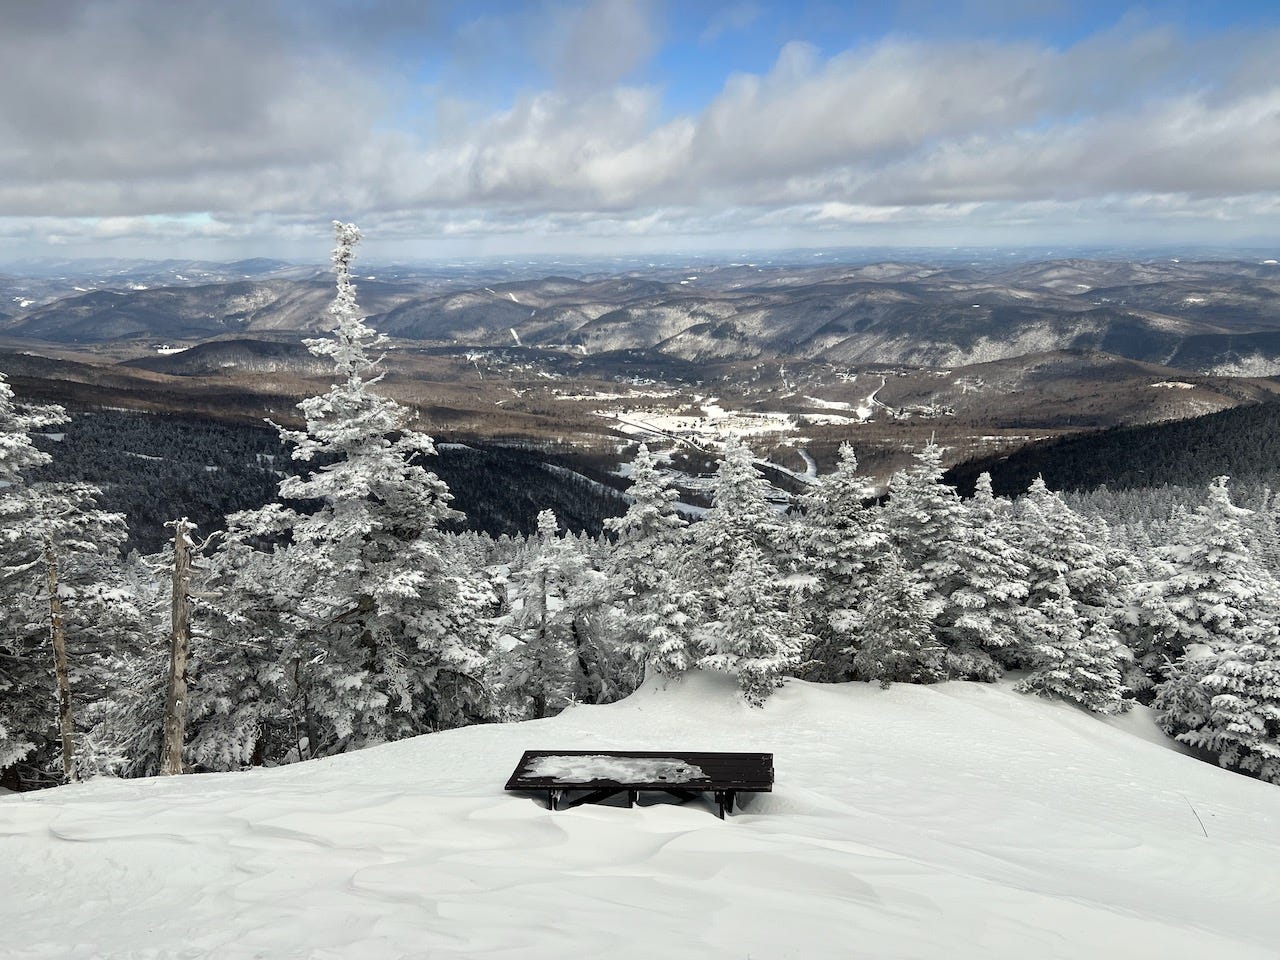 Photo by Author — back on the slopes — the view from Killington, Vermont, USA